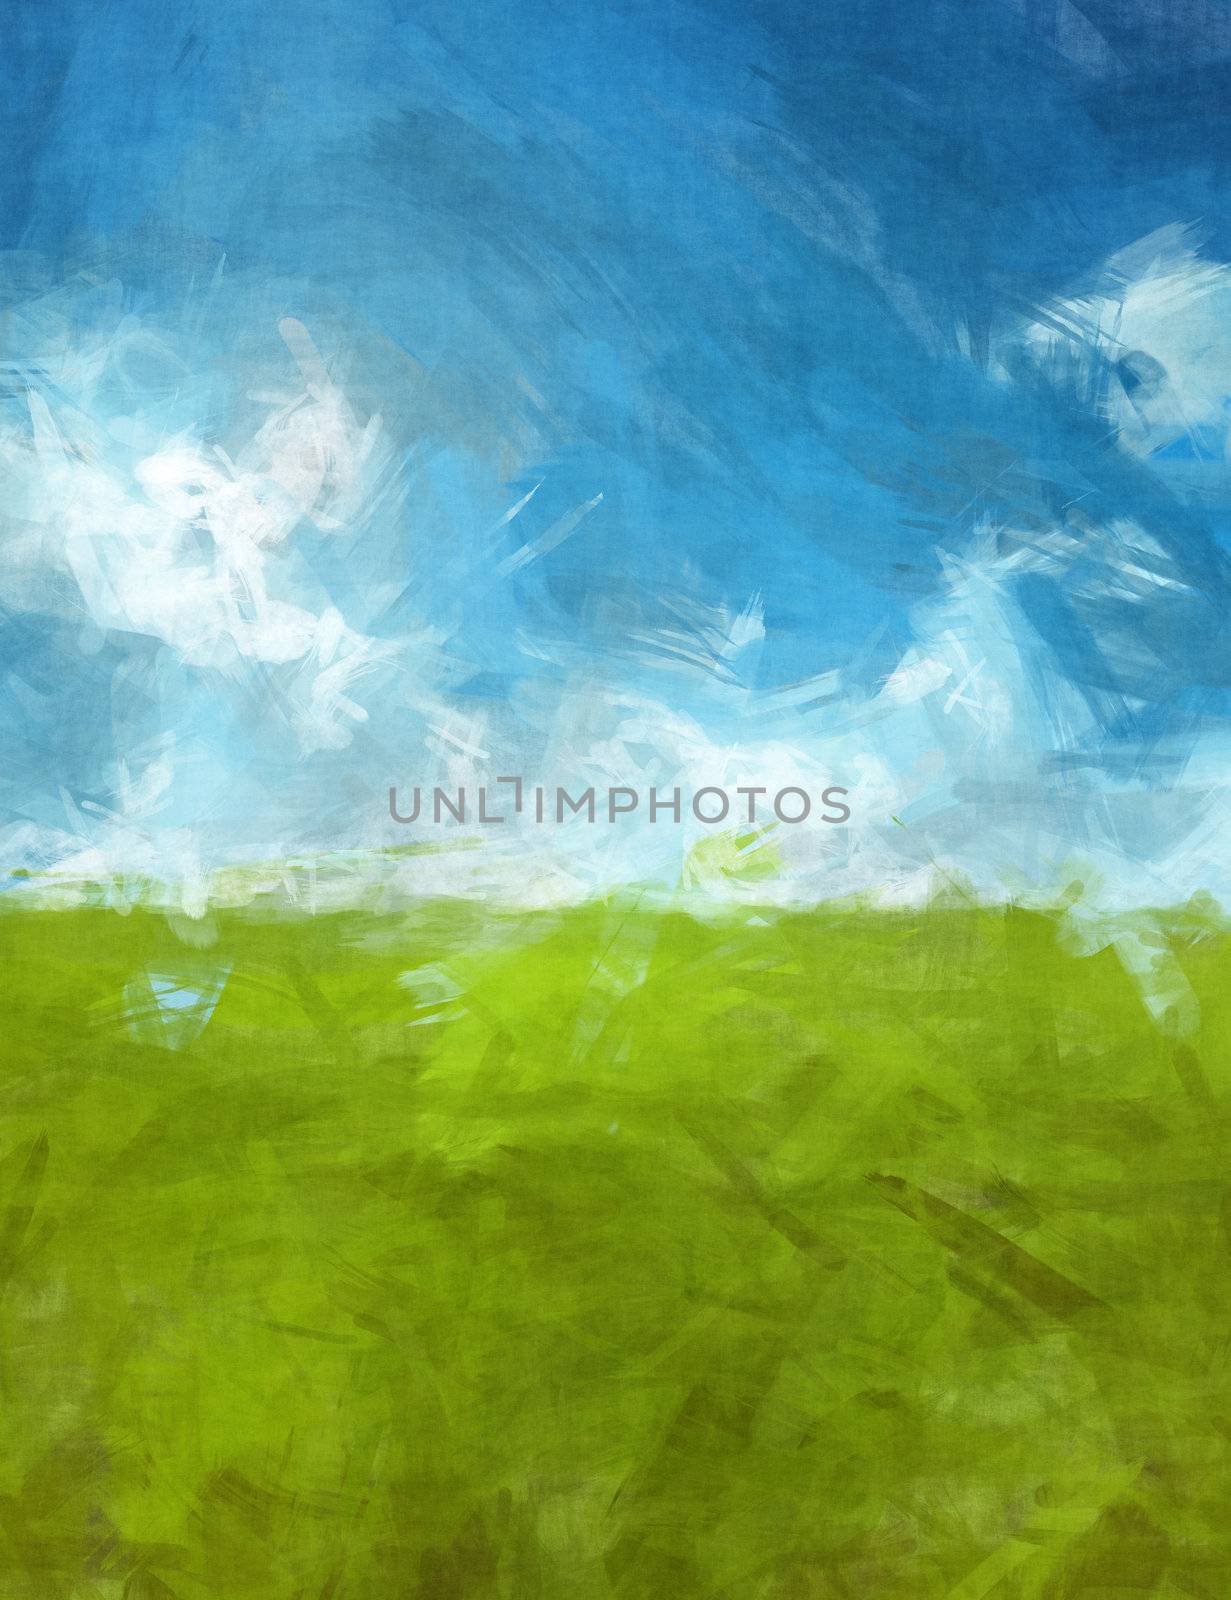 An image of a blue green abtsract landscape background